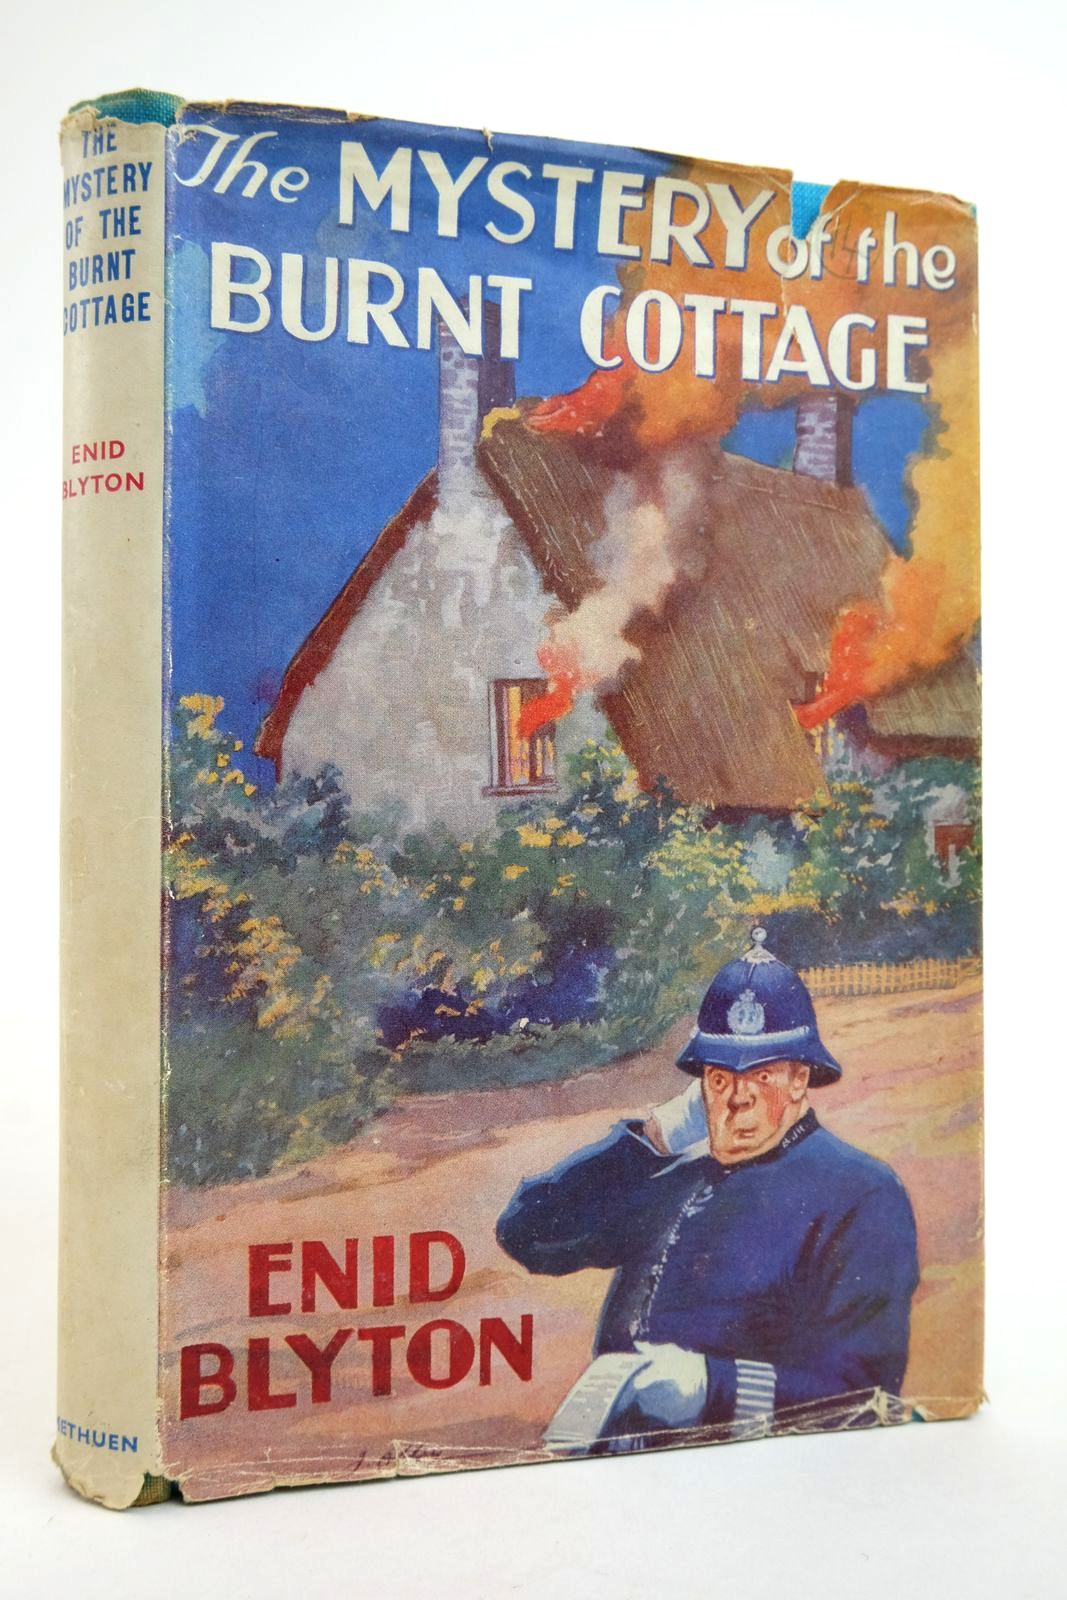 Photo of THE MYSTERY OF THE BURNT COTTAGE written by Blyton, Enid illustrated by Abbey, J. published by Methuen &amp; Co. Ltd. (STOCK CODE: 2135594)  for sale by Stella & Rose's Books